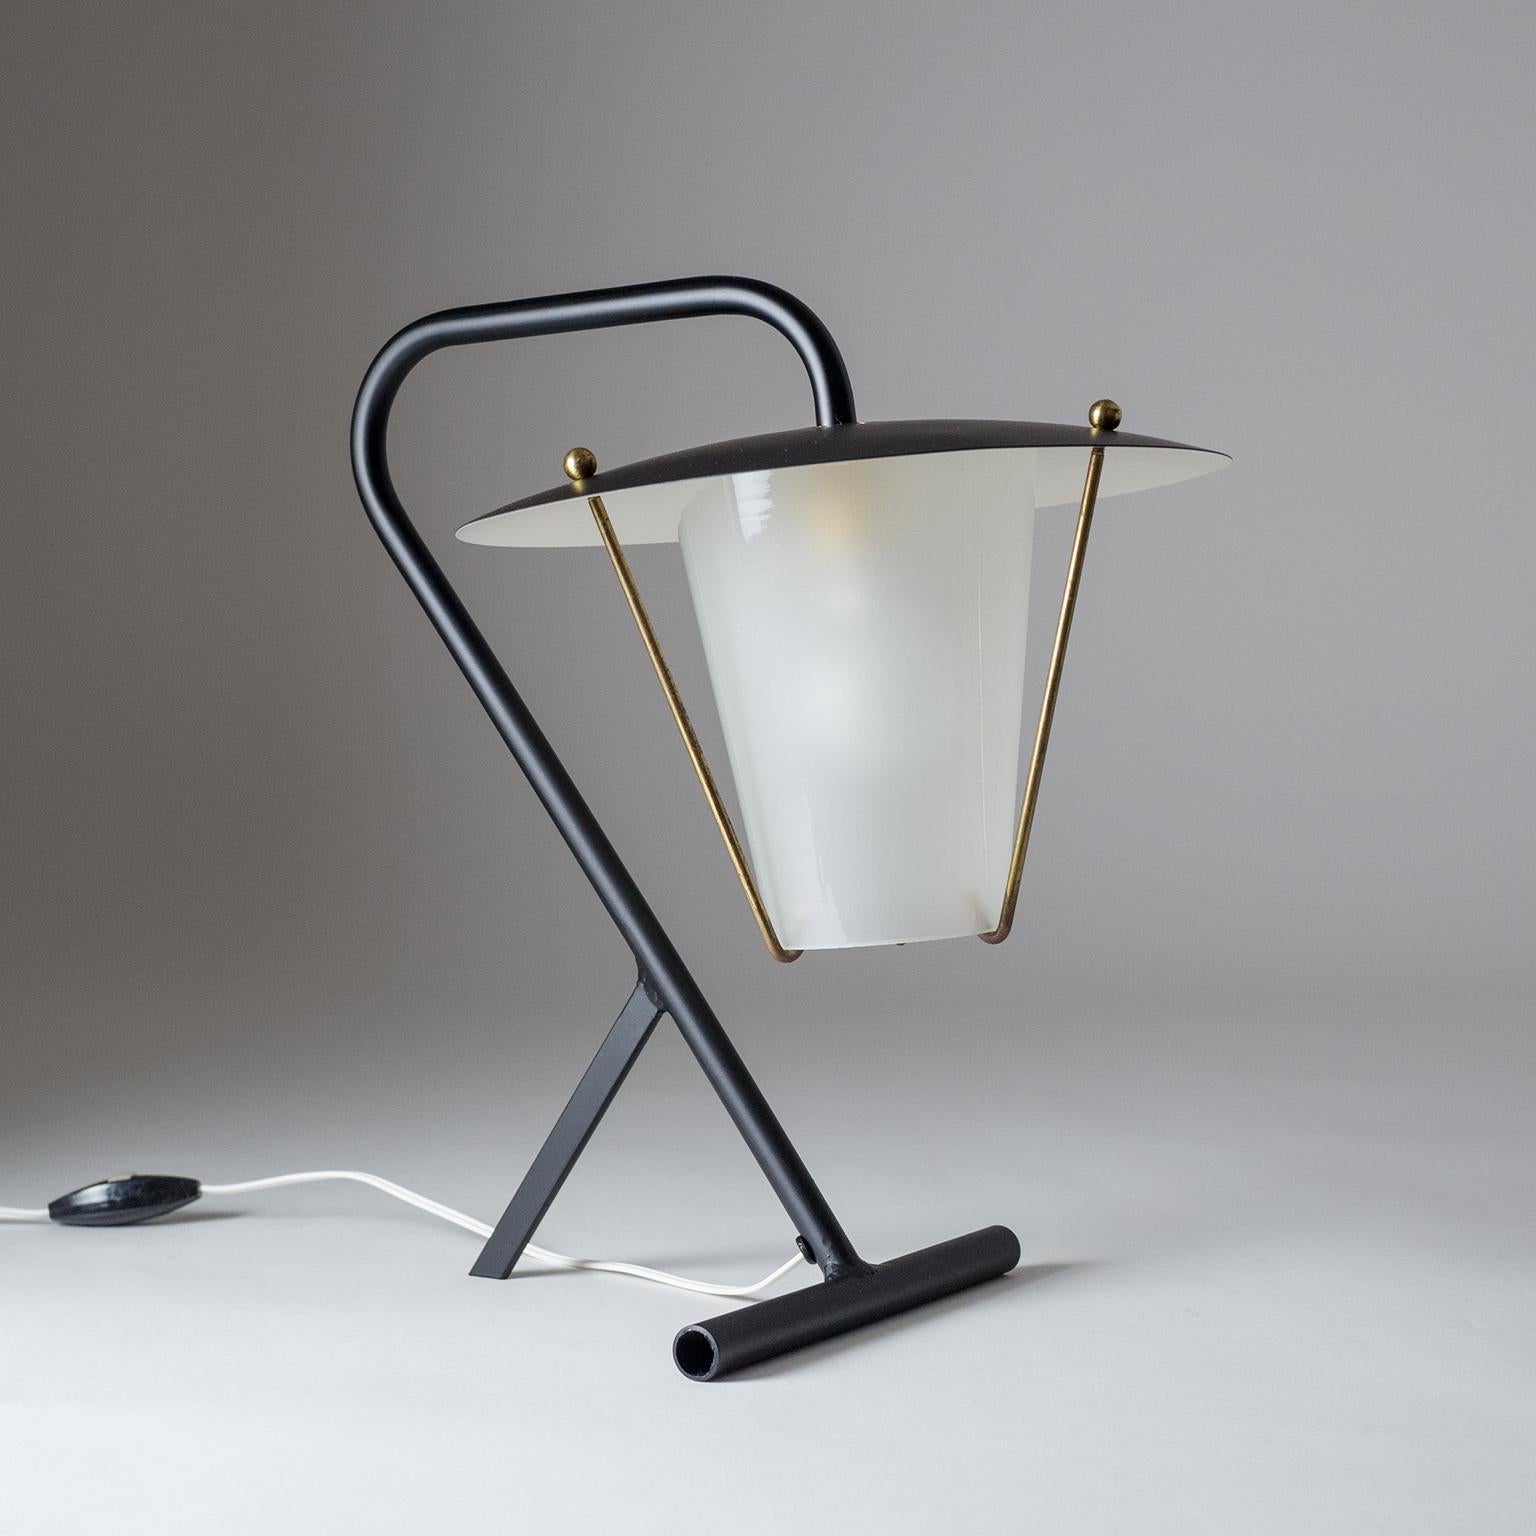 Brilliant modernist French table lamp from the early 1950s. The Minimalist sculptural base holds a lantern style body with glass diffuser (frosted on the inside). One brass and ceramic E14 socket with original switch and plug.